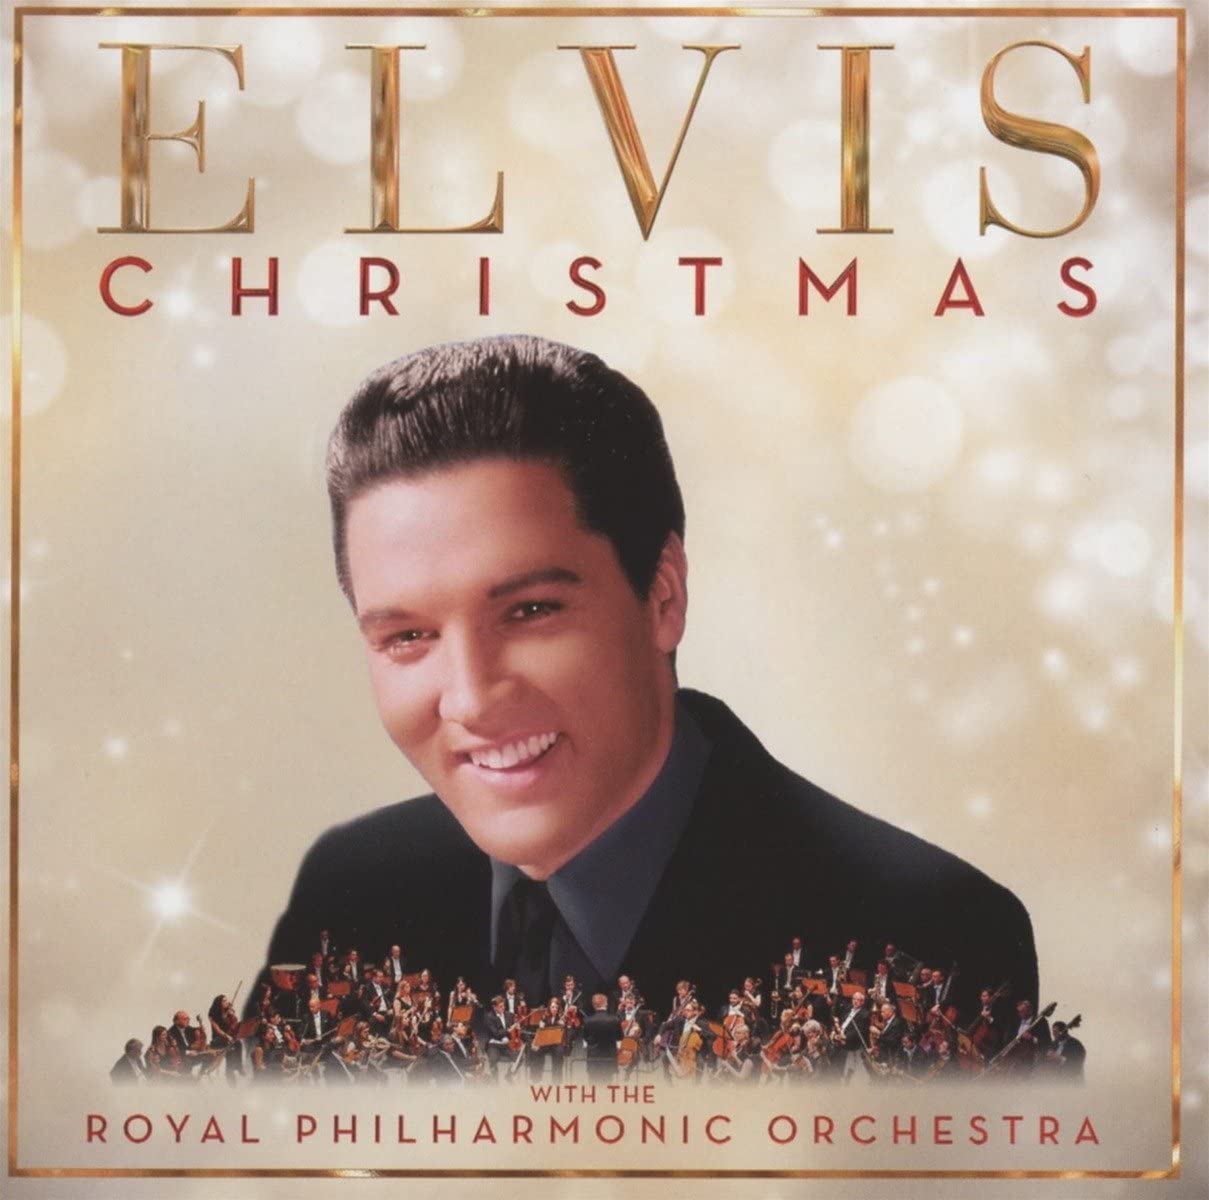 Christmas with Elvis and the Royal
Philharmonic Orchestra by Elvis Presley